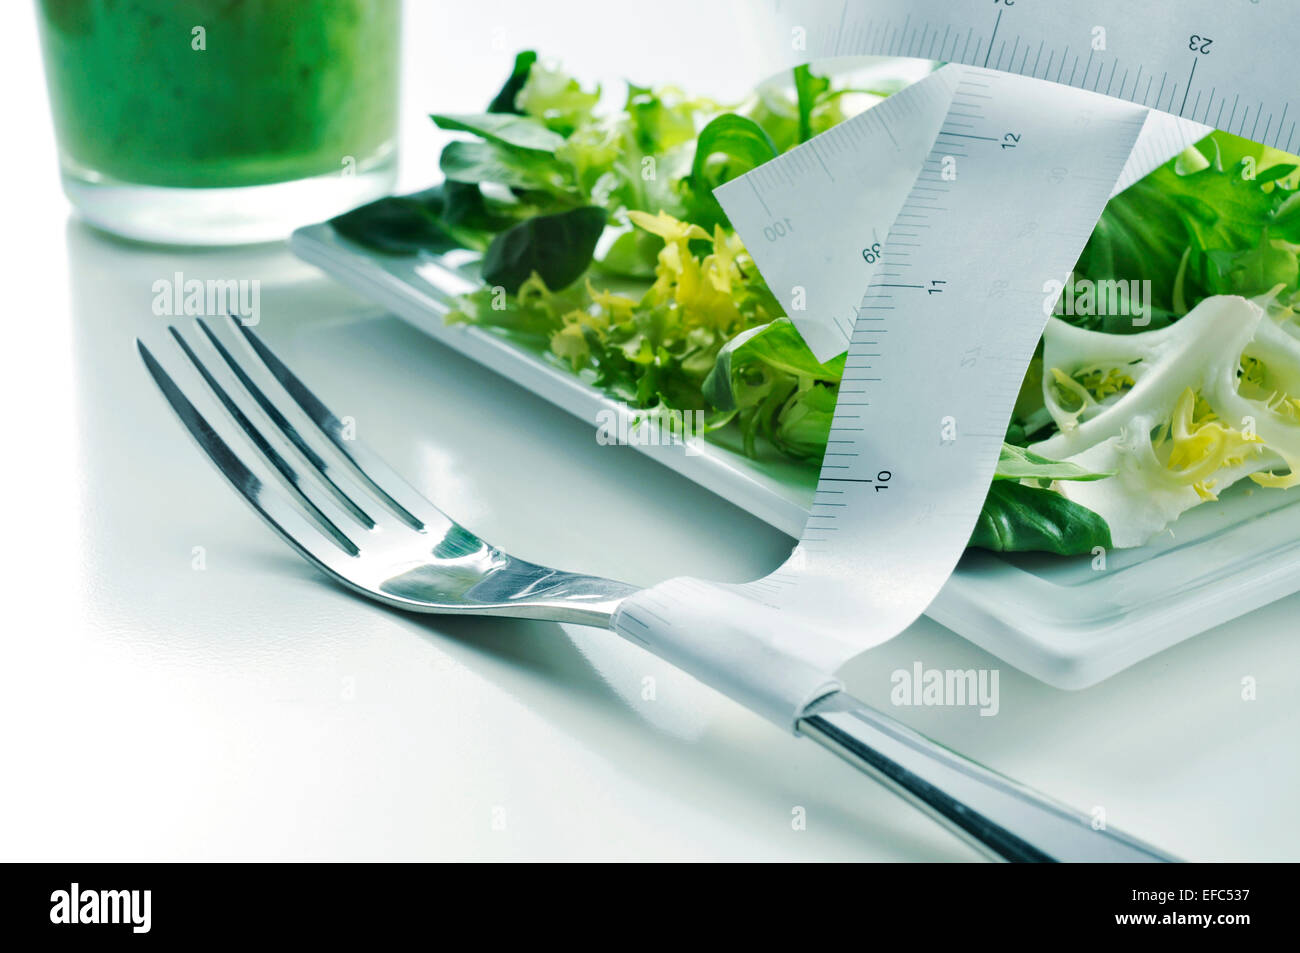 closeup of a plate with a green salad and a measuring tape and a green smoothie, depicting the concept of dieting or to stay fit Stock Photo